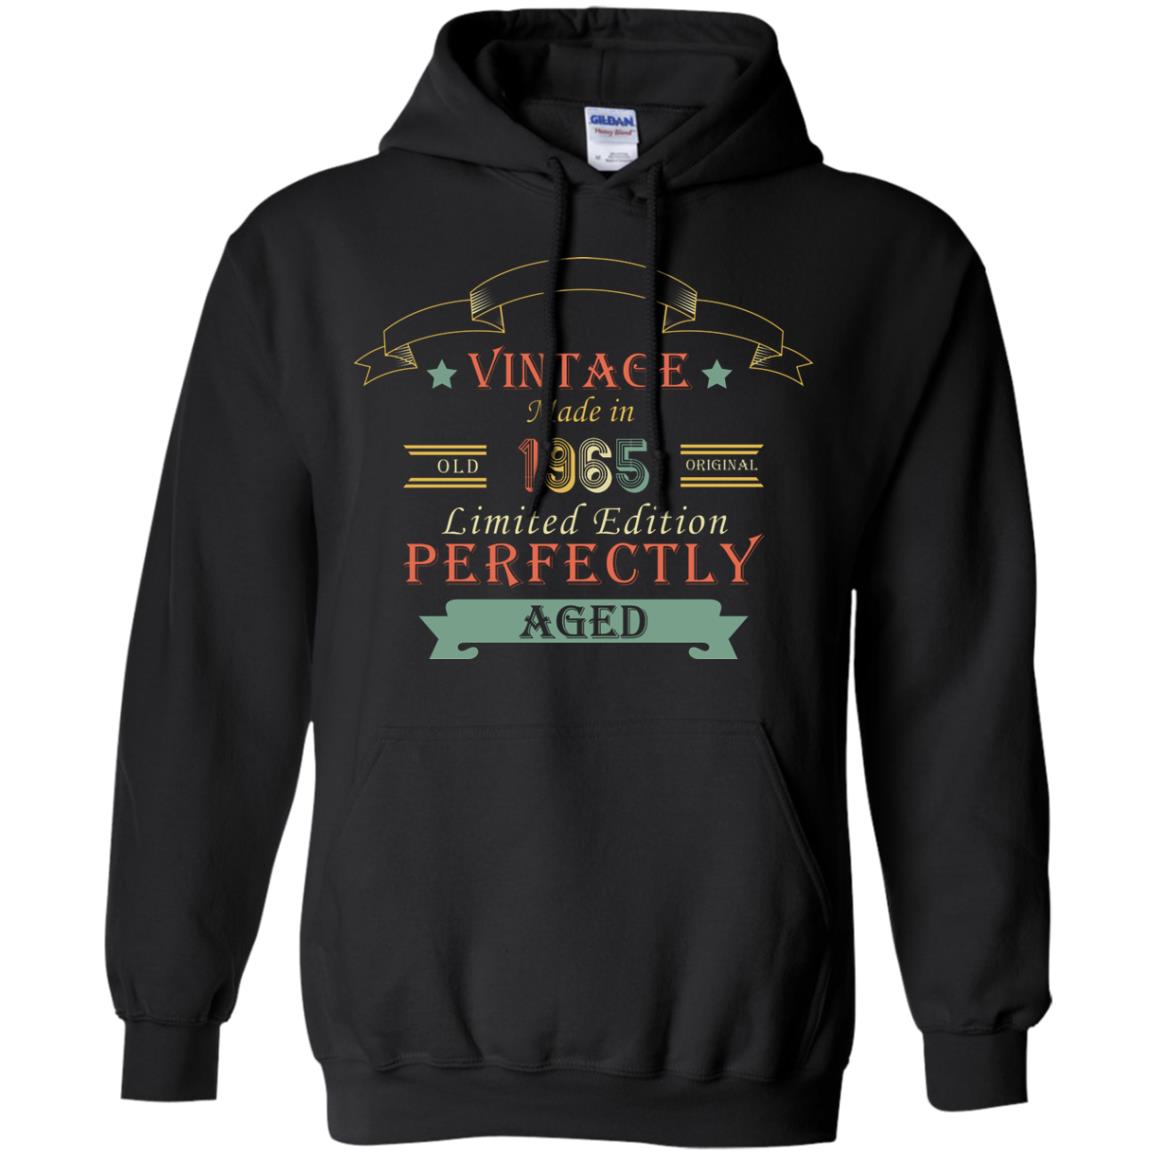 Vintage Made In Old 1965 Original Limited Edition Perfectly Aged 53th Birthday T-shirtG185 Gildan Pullover Hoodie 8 oz.